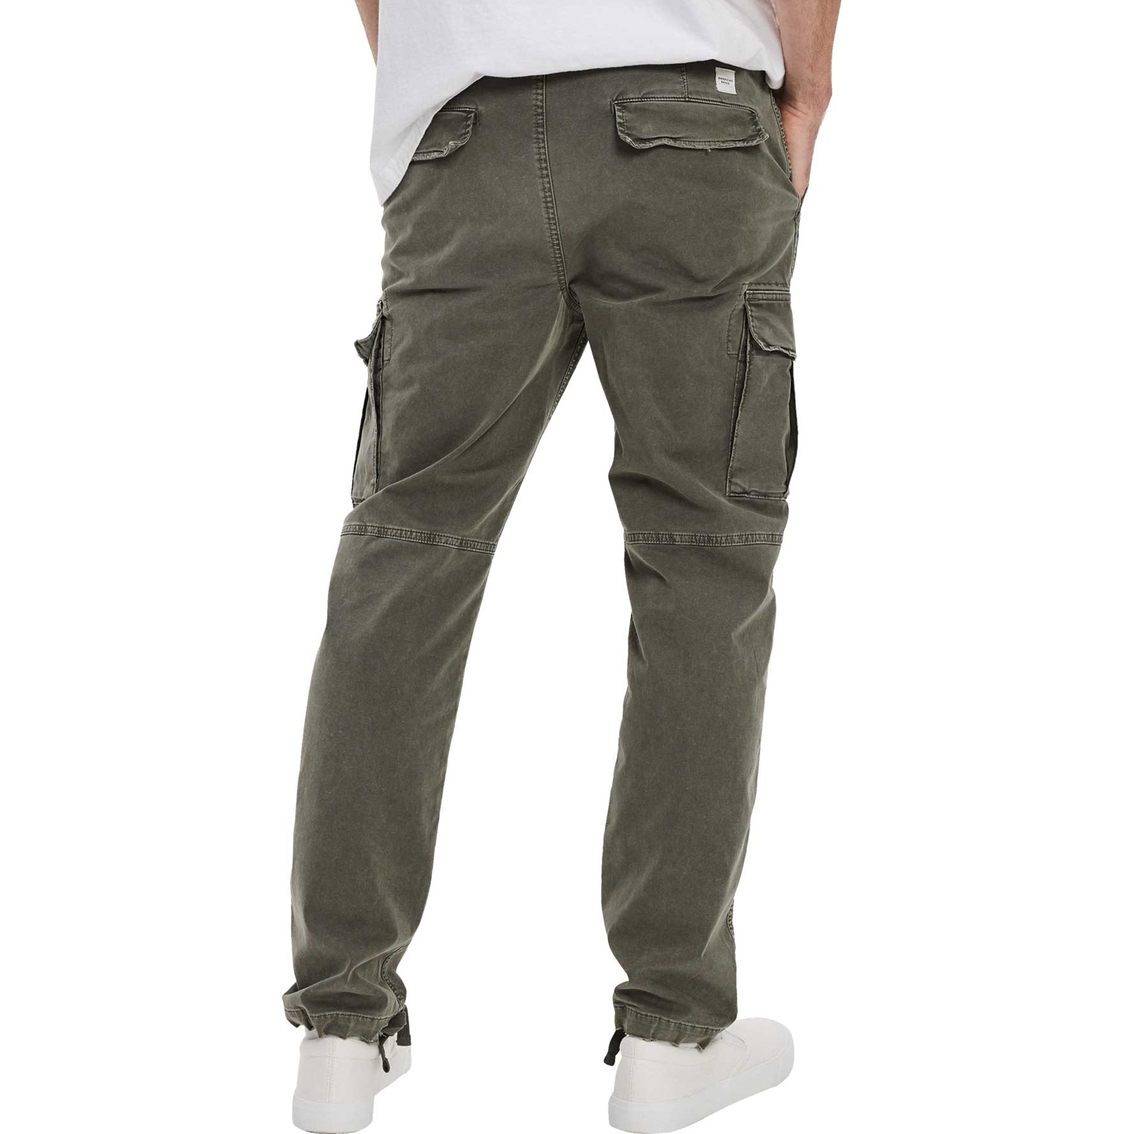 American Eagle Flex Slim Lived In Cargo Pants - Image 2 of 5